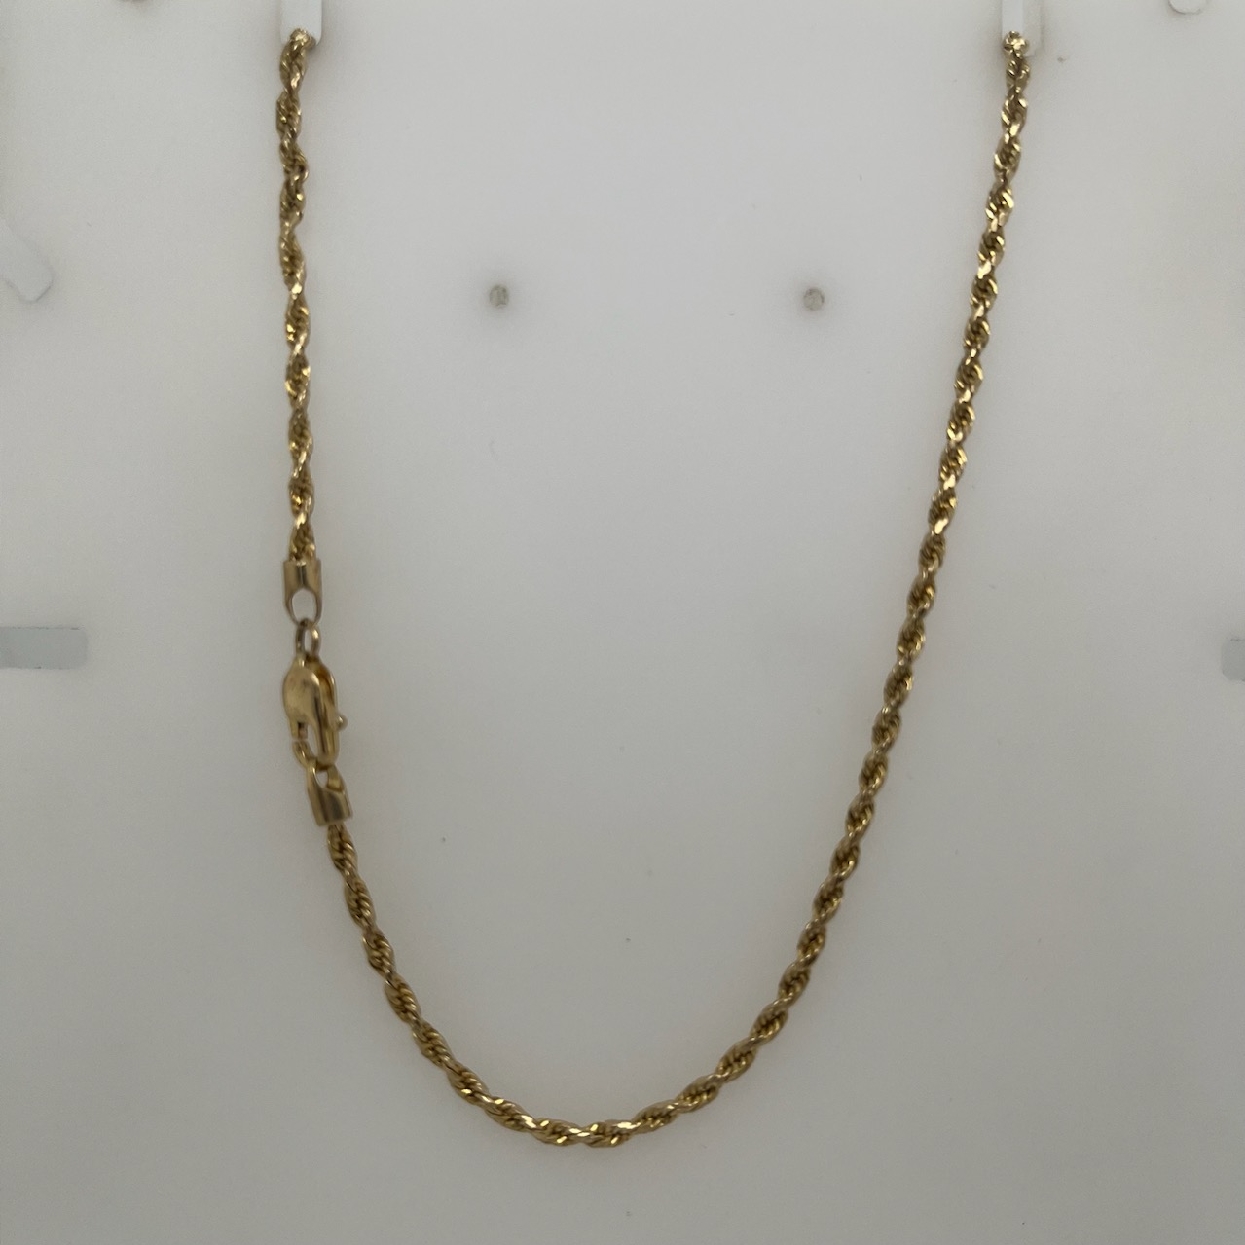 14K Yellow Gold 2.0mm Rope Chain with Lobster Claw

22 Inches